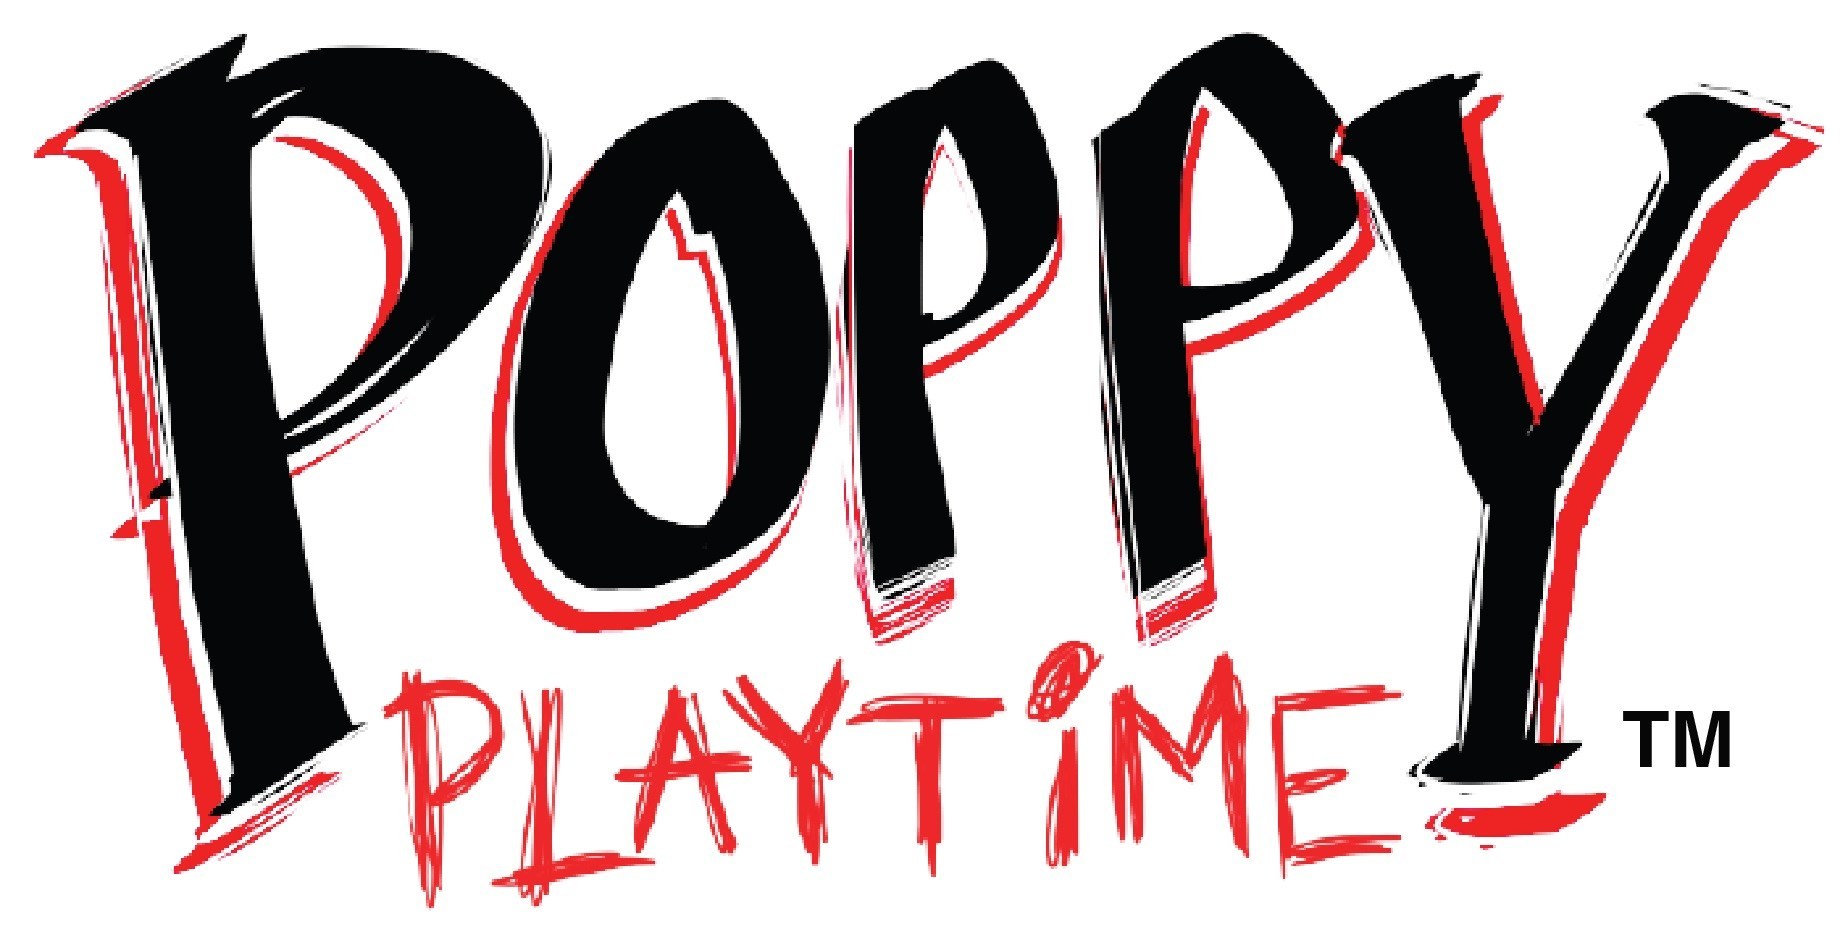 About: Poppy Project : Playtime (Google Play version)